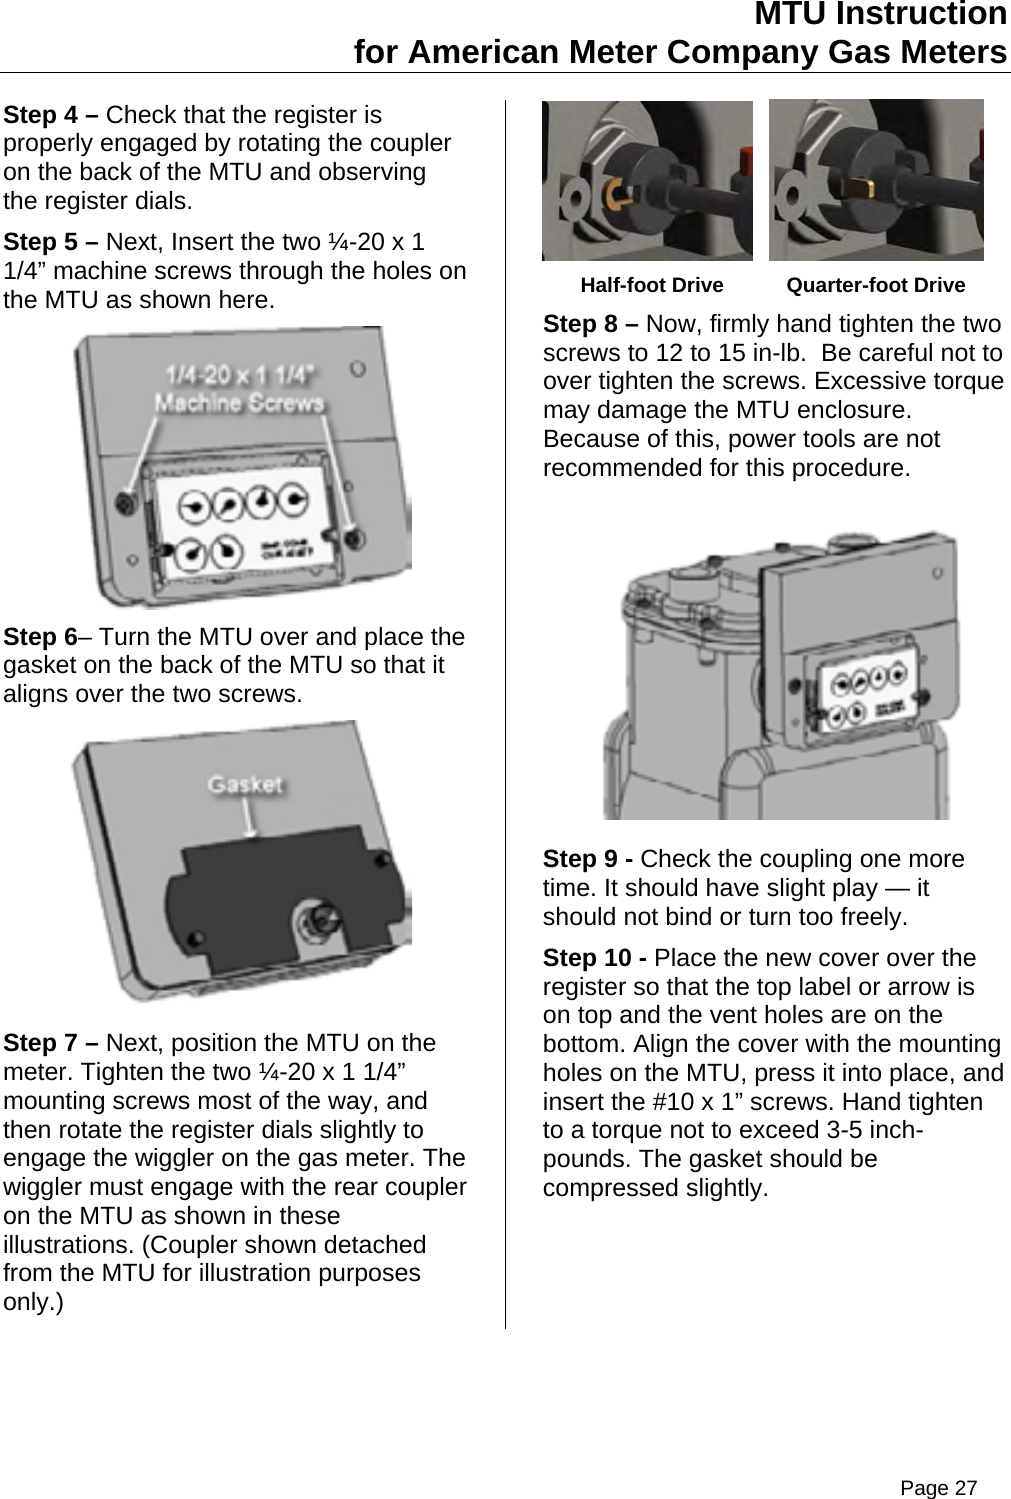 Page 27 of Aclara Technologies 09015 Transmitter for Meter Reading User Manual users manual